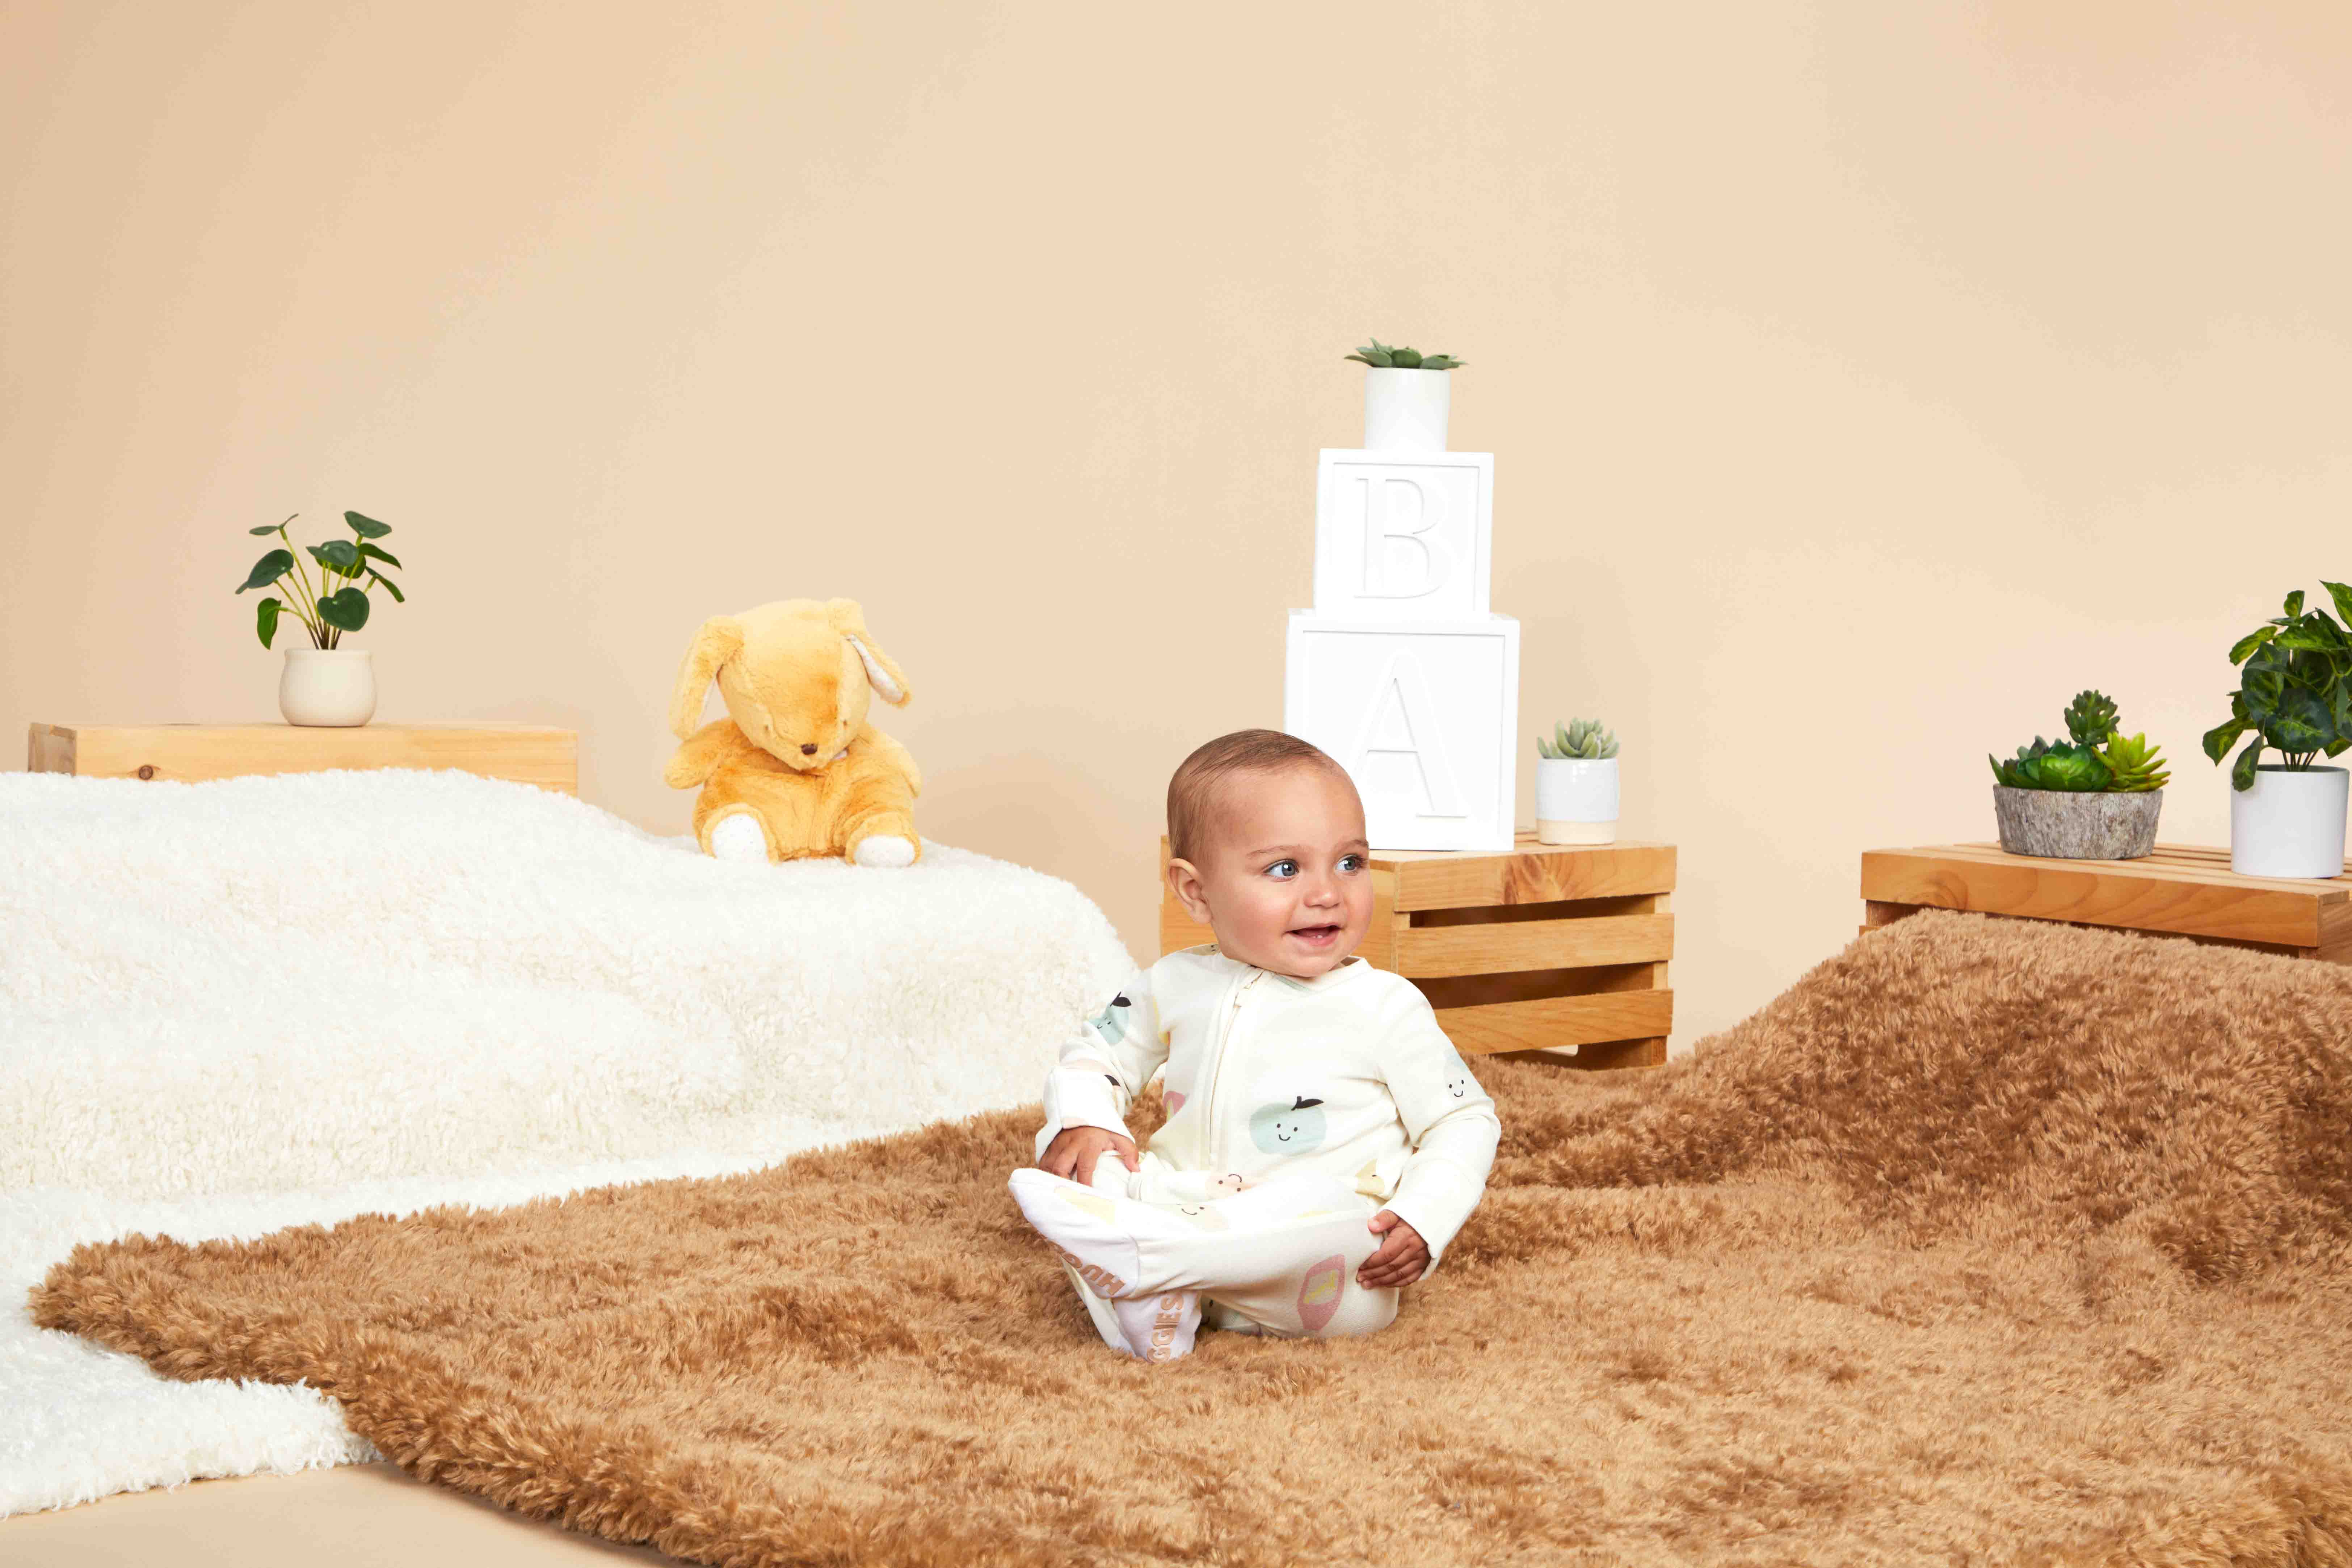 Huggies® Made Baby History By Featuring Babies Born On Gameday In Their  Latest Ad, Part Of A New Global Campaign, We Got You, Baby